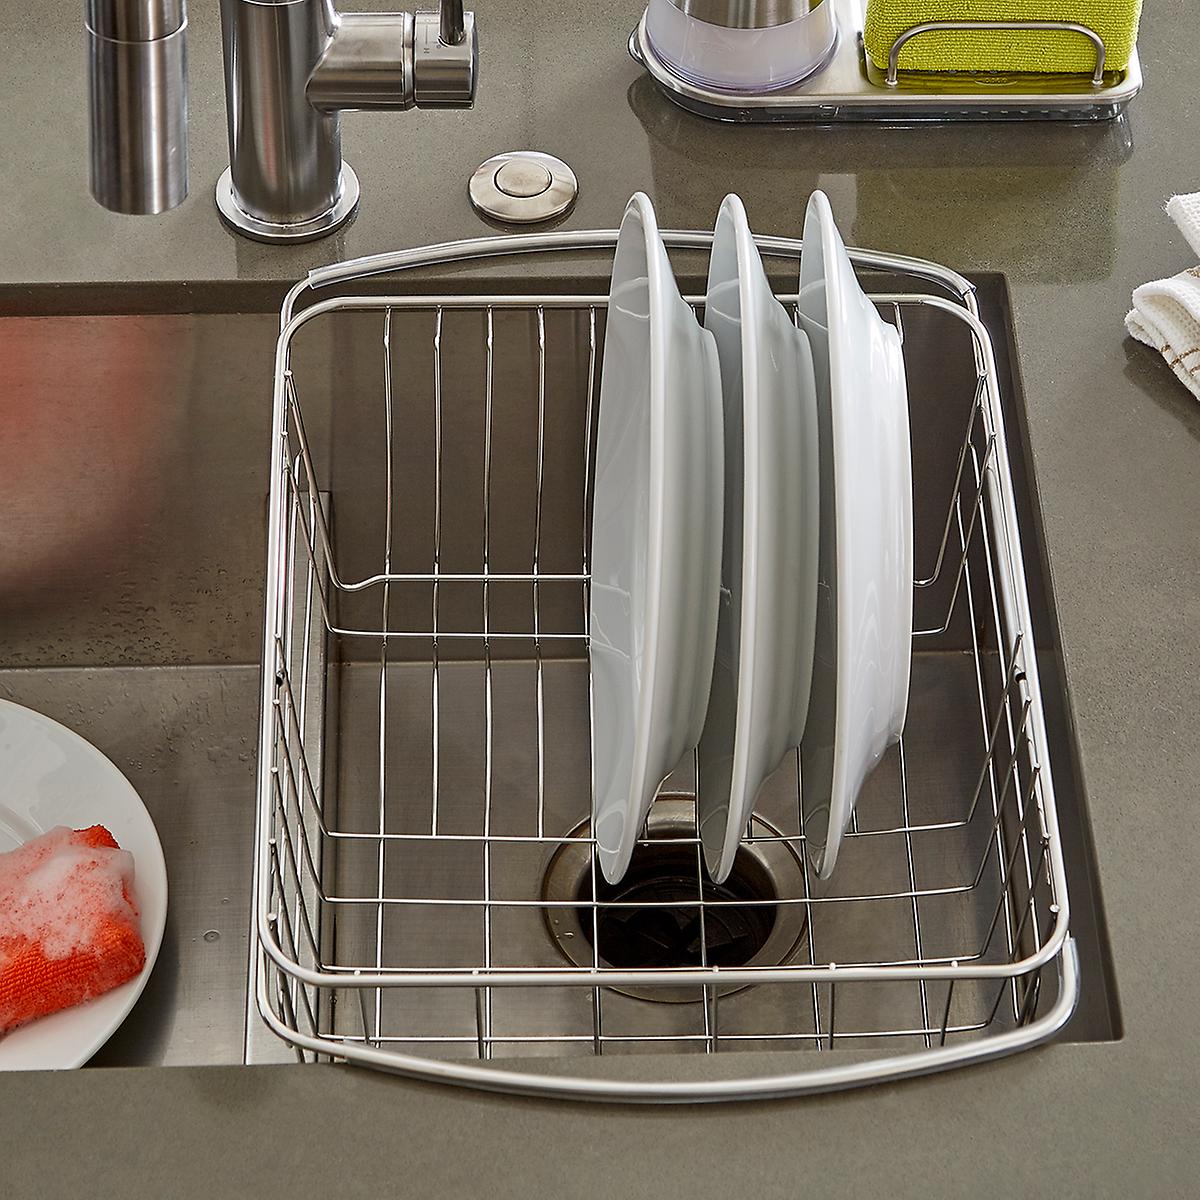 Stainless Steel In Sink Dish Drainer The Container Store